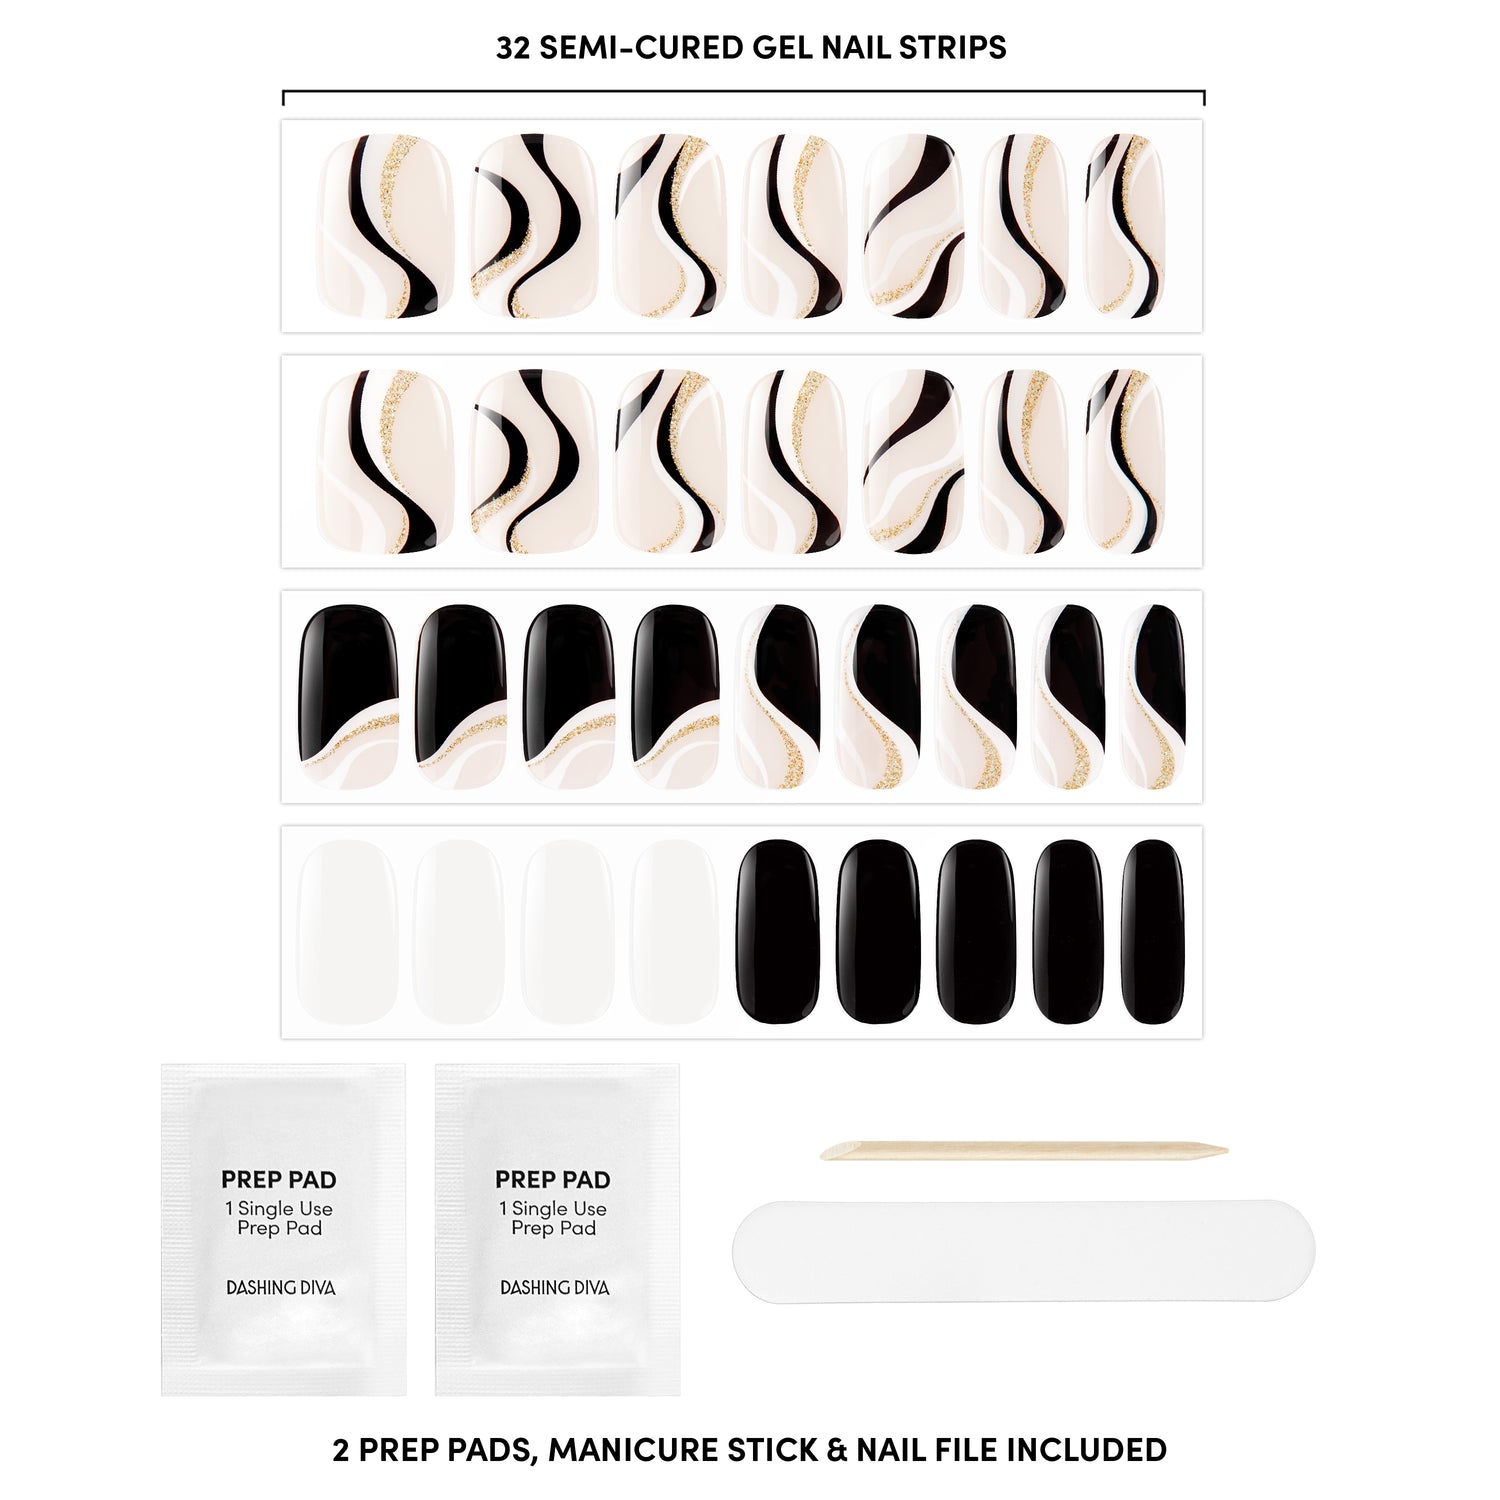  Semi-cured sheer nude gel nail strips featuring black & white abstract waves and gold glitter with mega volume & maximum shine.